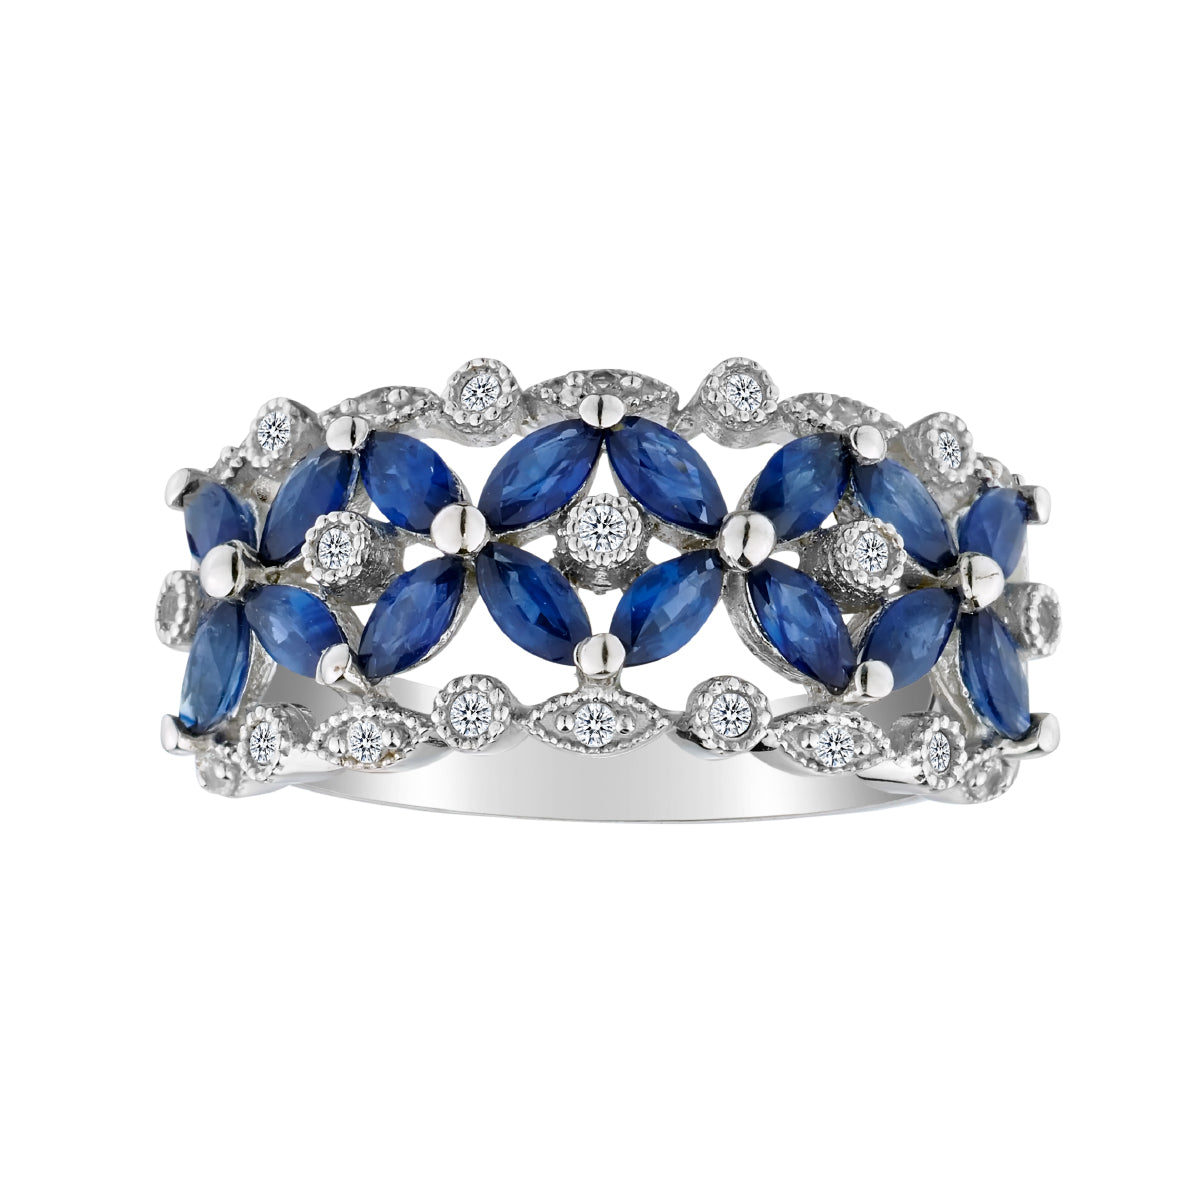 1.60 Carat Genuine Blue Sapphire & .18 Carat White Topaz Ring, Sterling Silver. Gemstone Rings. Griffin Jewellery Designs